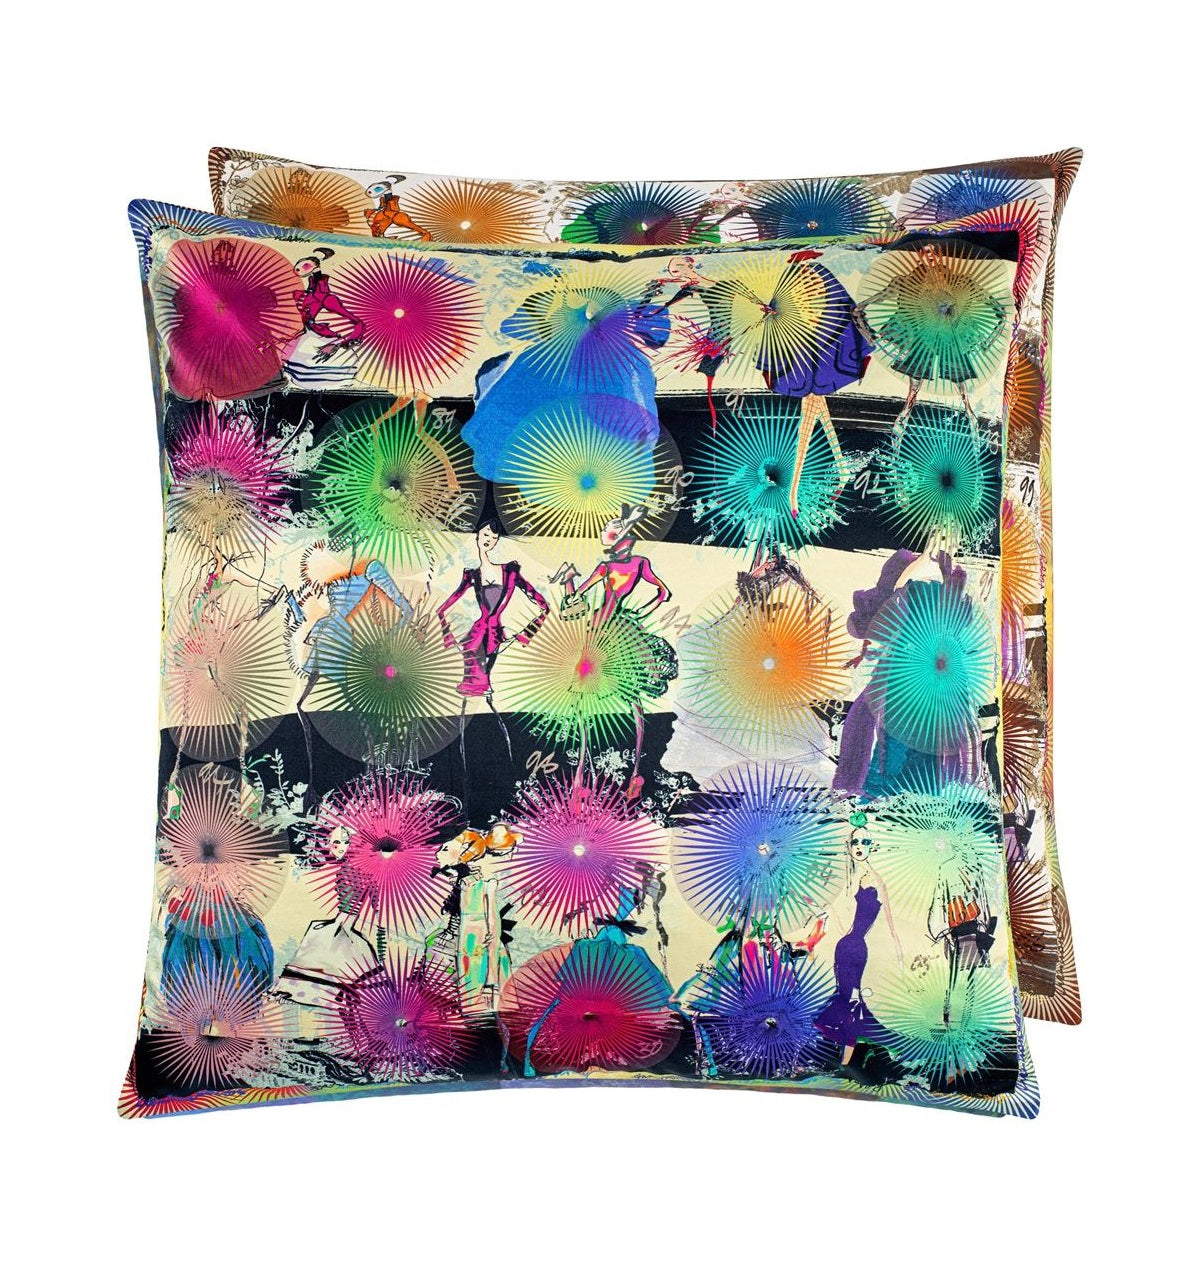 Two-sided pillow LACROIX PHOTOCALL cotton satin